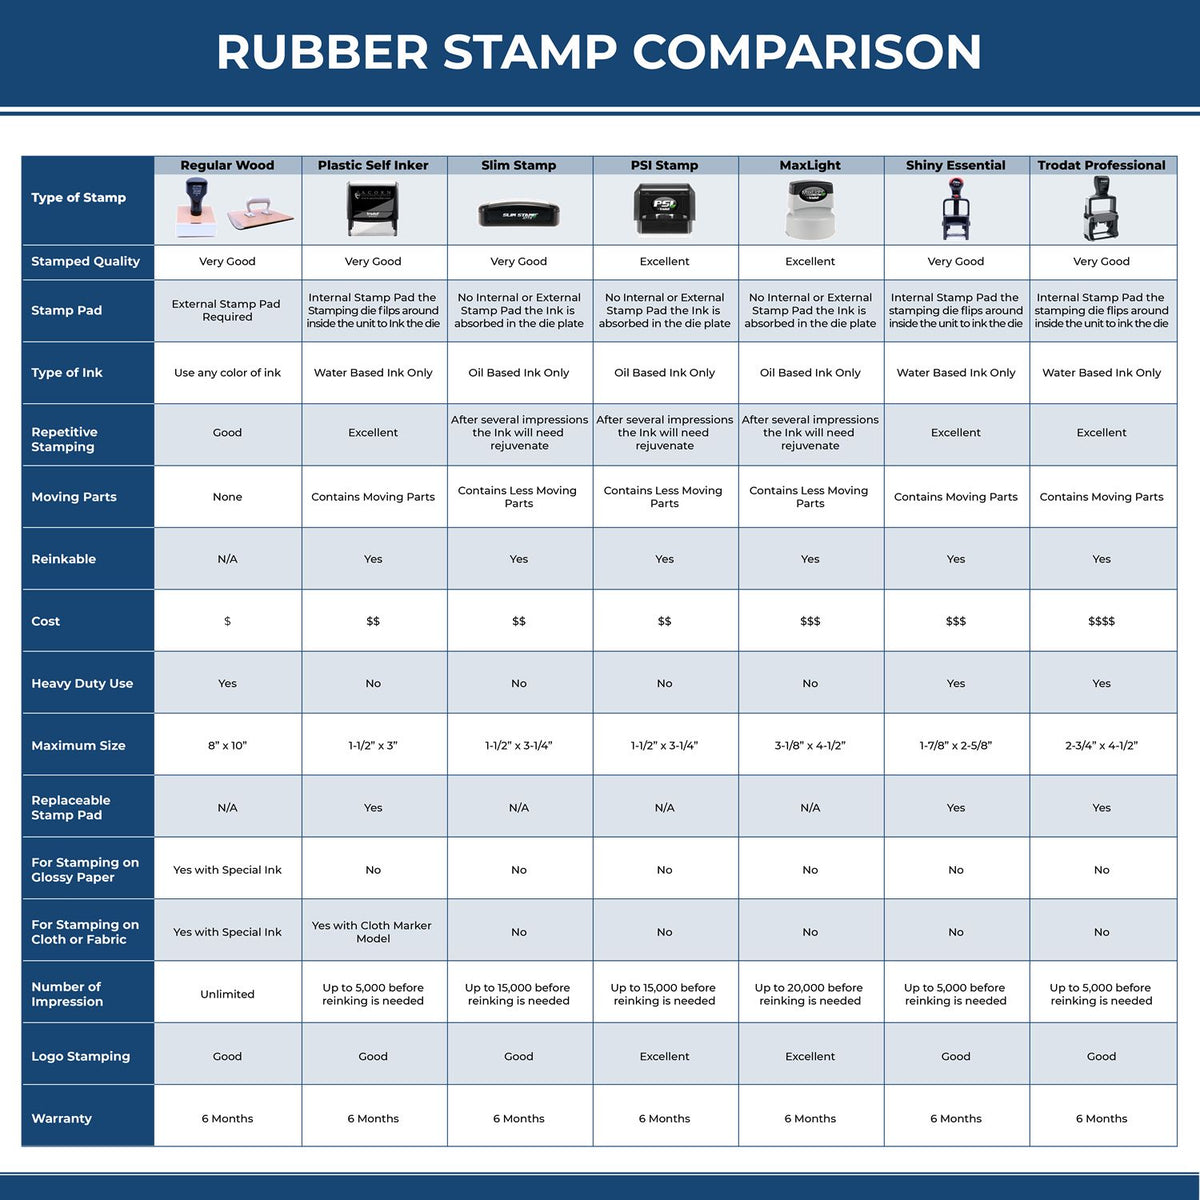 A comparison chart for the different types of mount models available for the Wooden Handle Illinois Rectangular Notary Public Stamp.